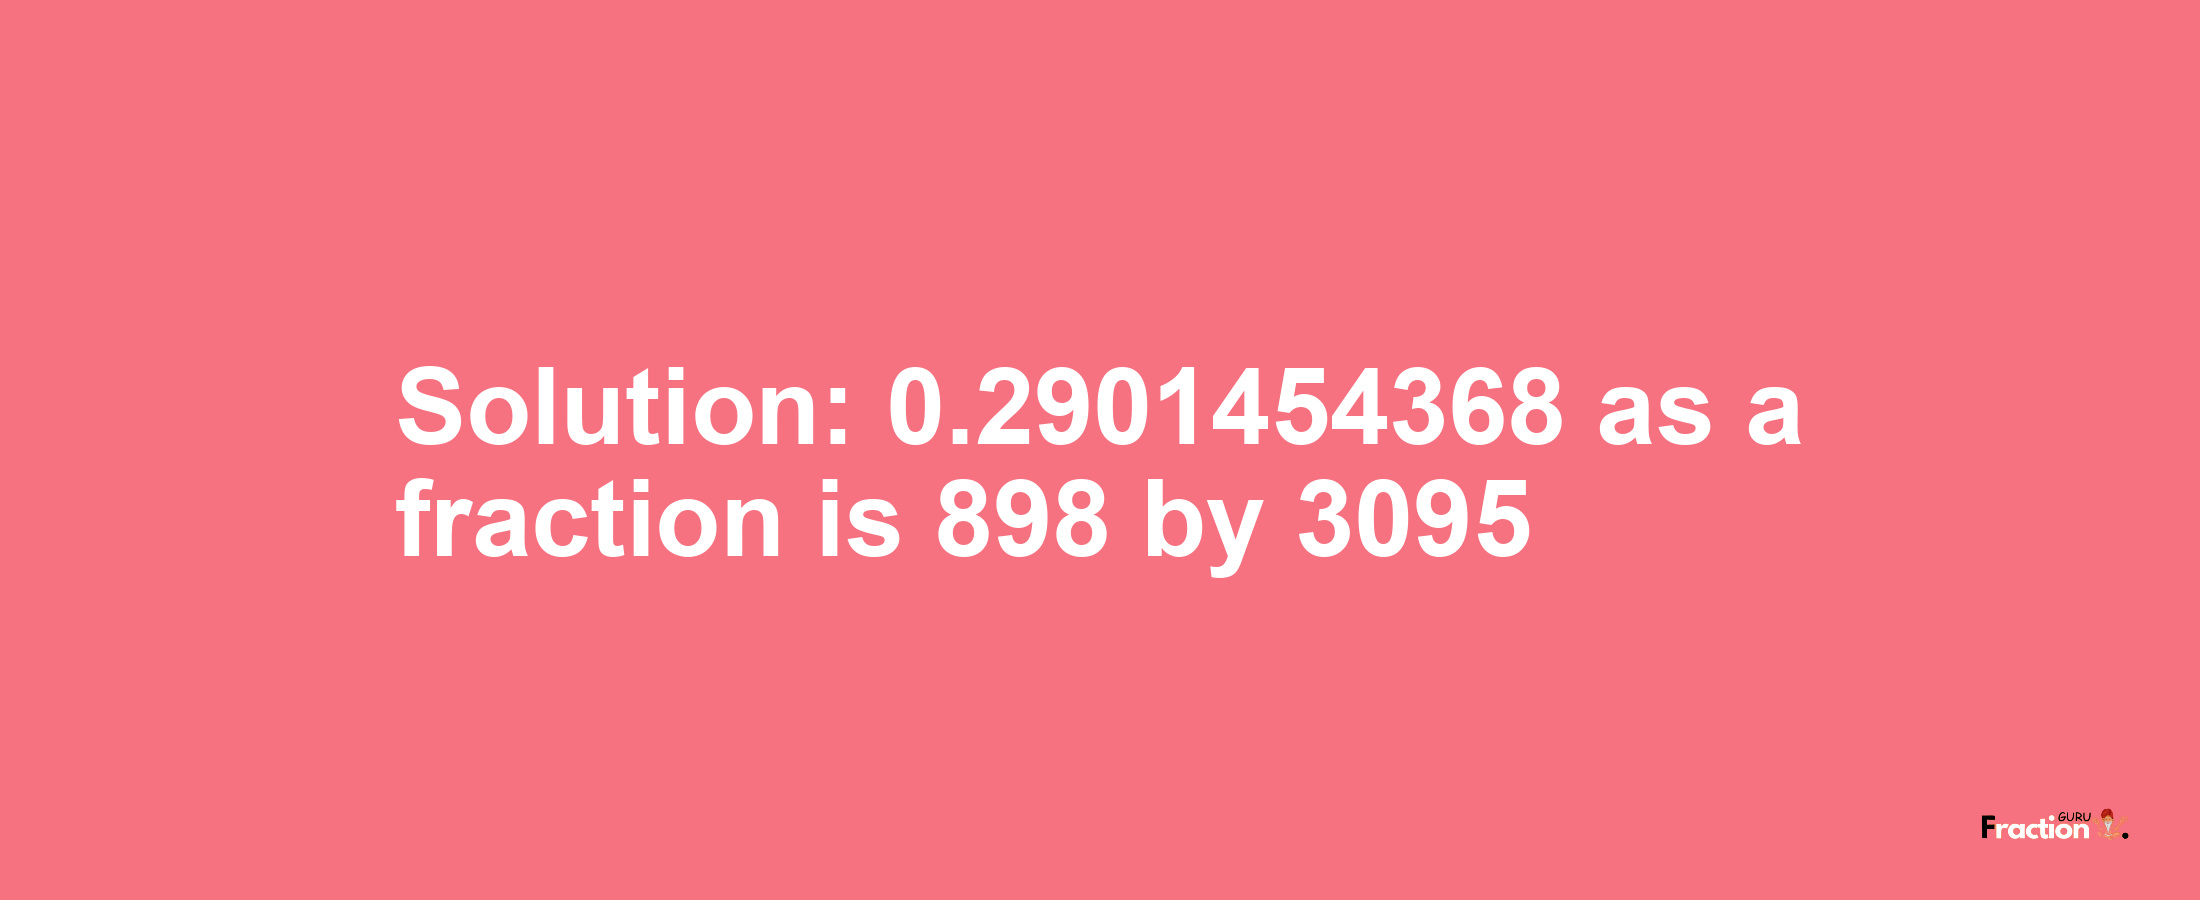 Solution:0.2901454368 as a fraction is 898/3095